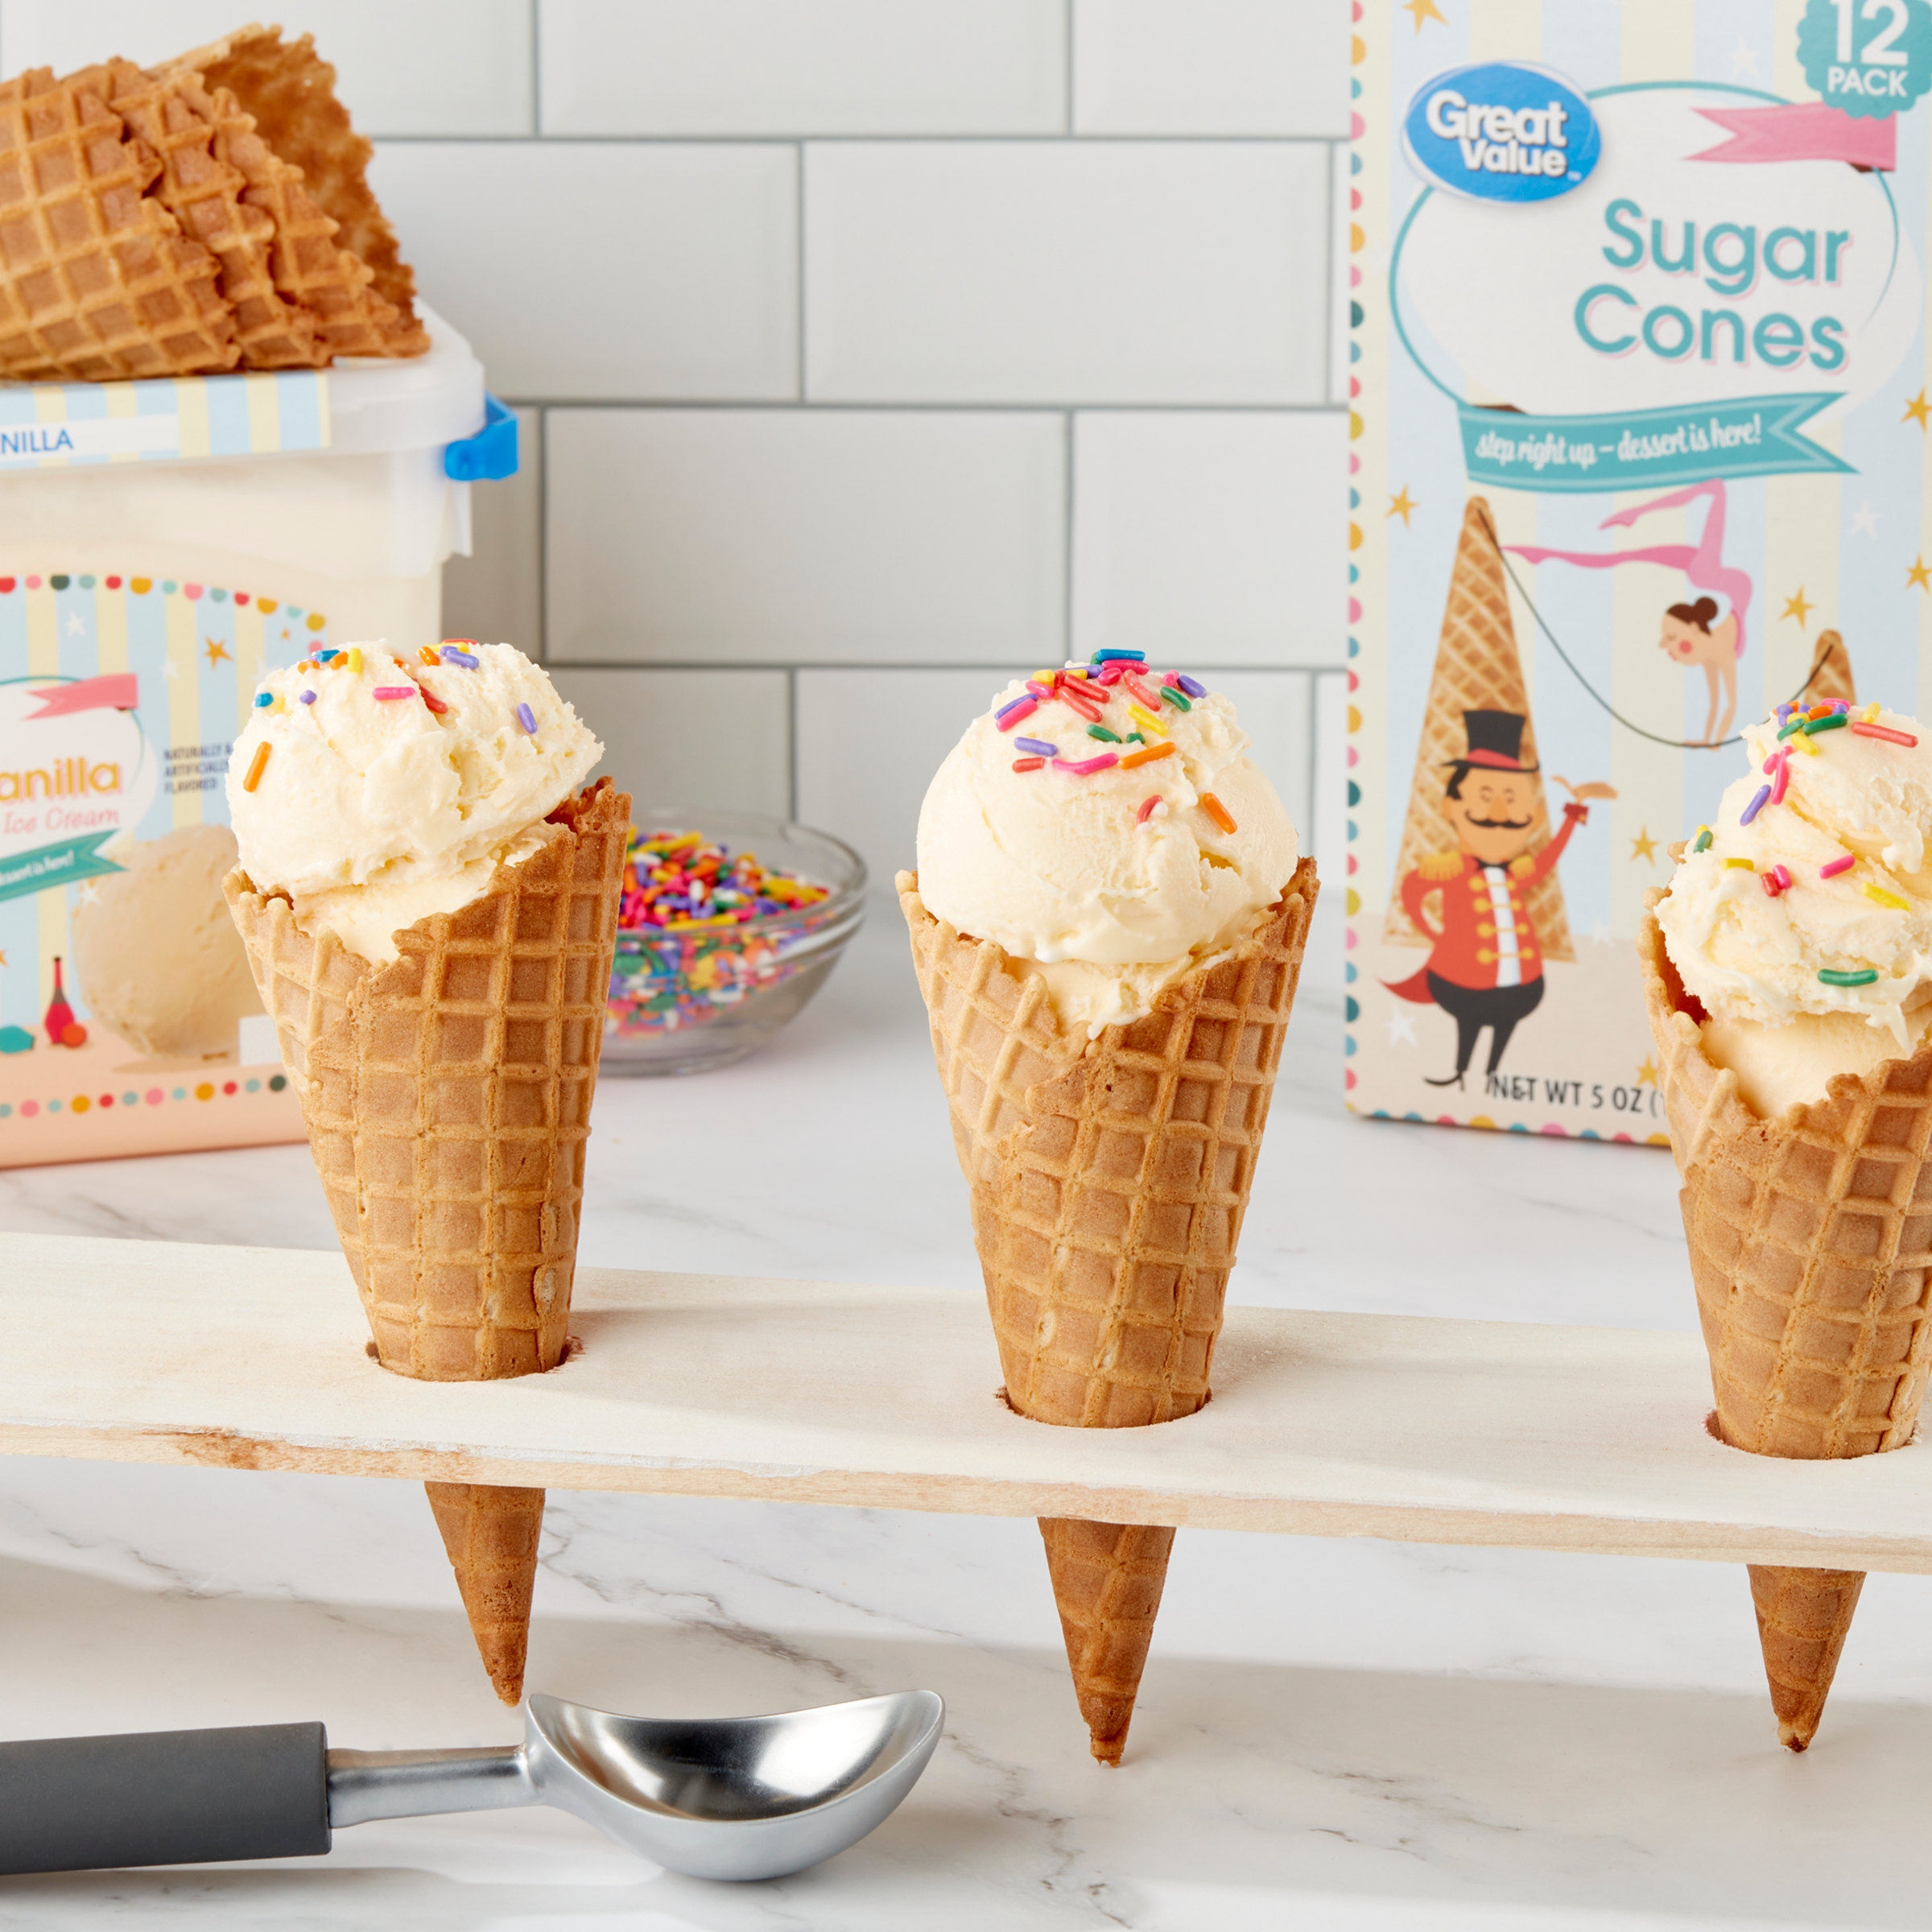 Great Value Waffles Cones, 7 oz, 12 Count - image 2 of 7